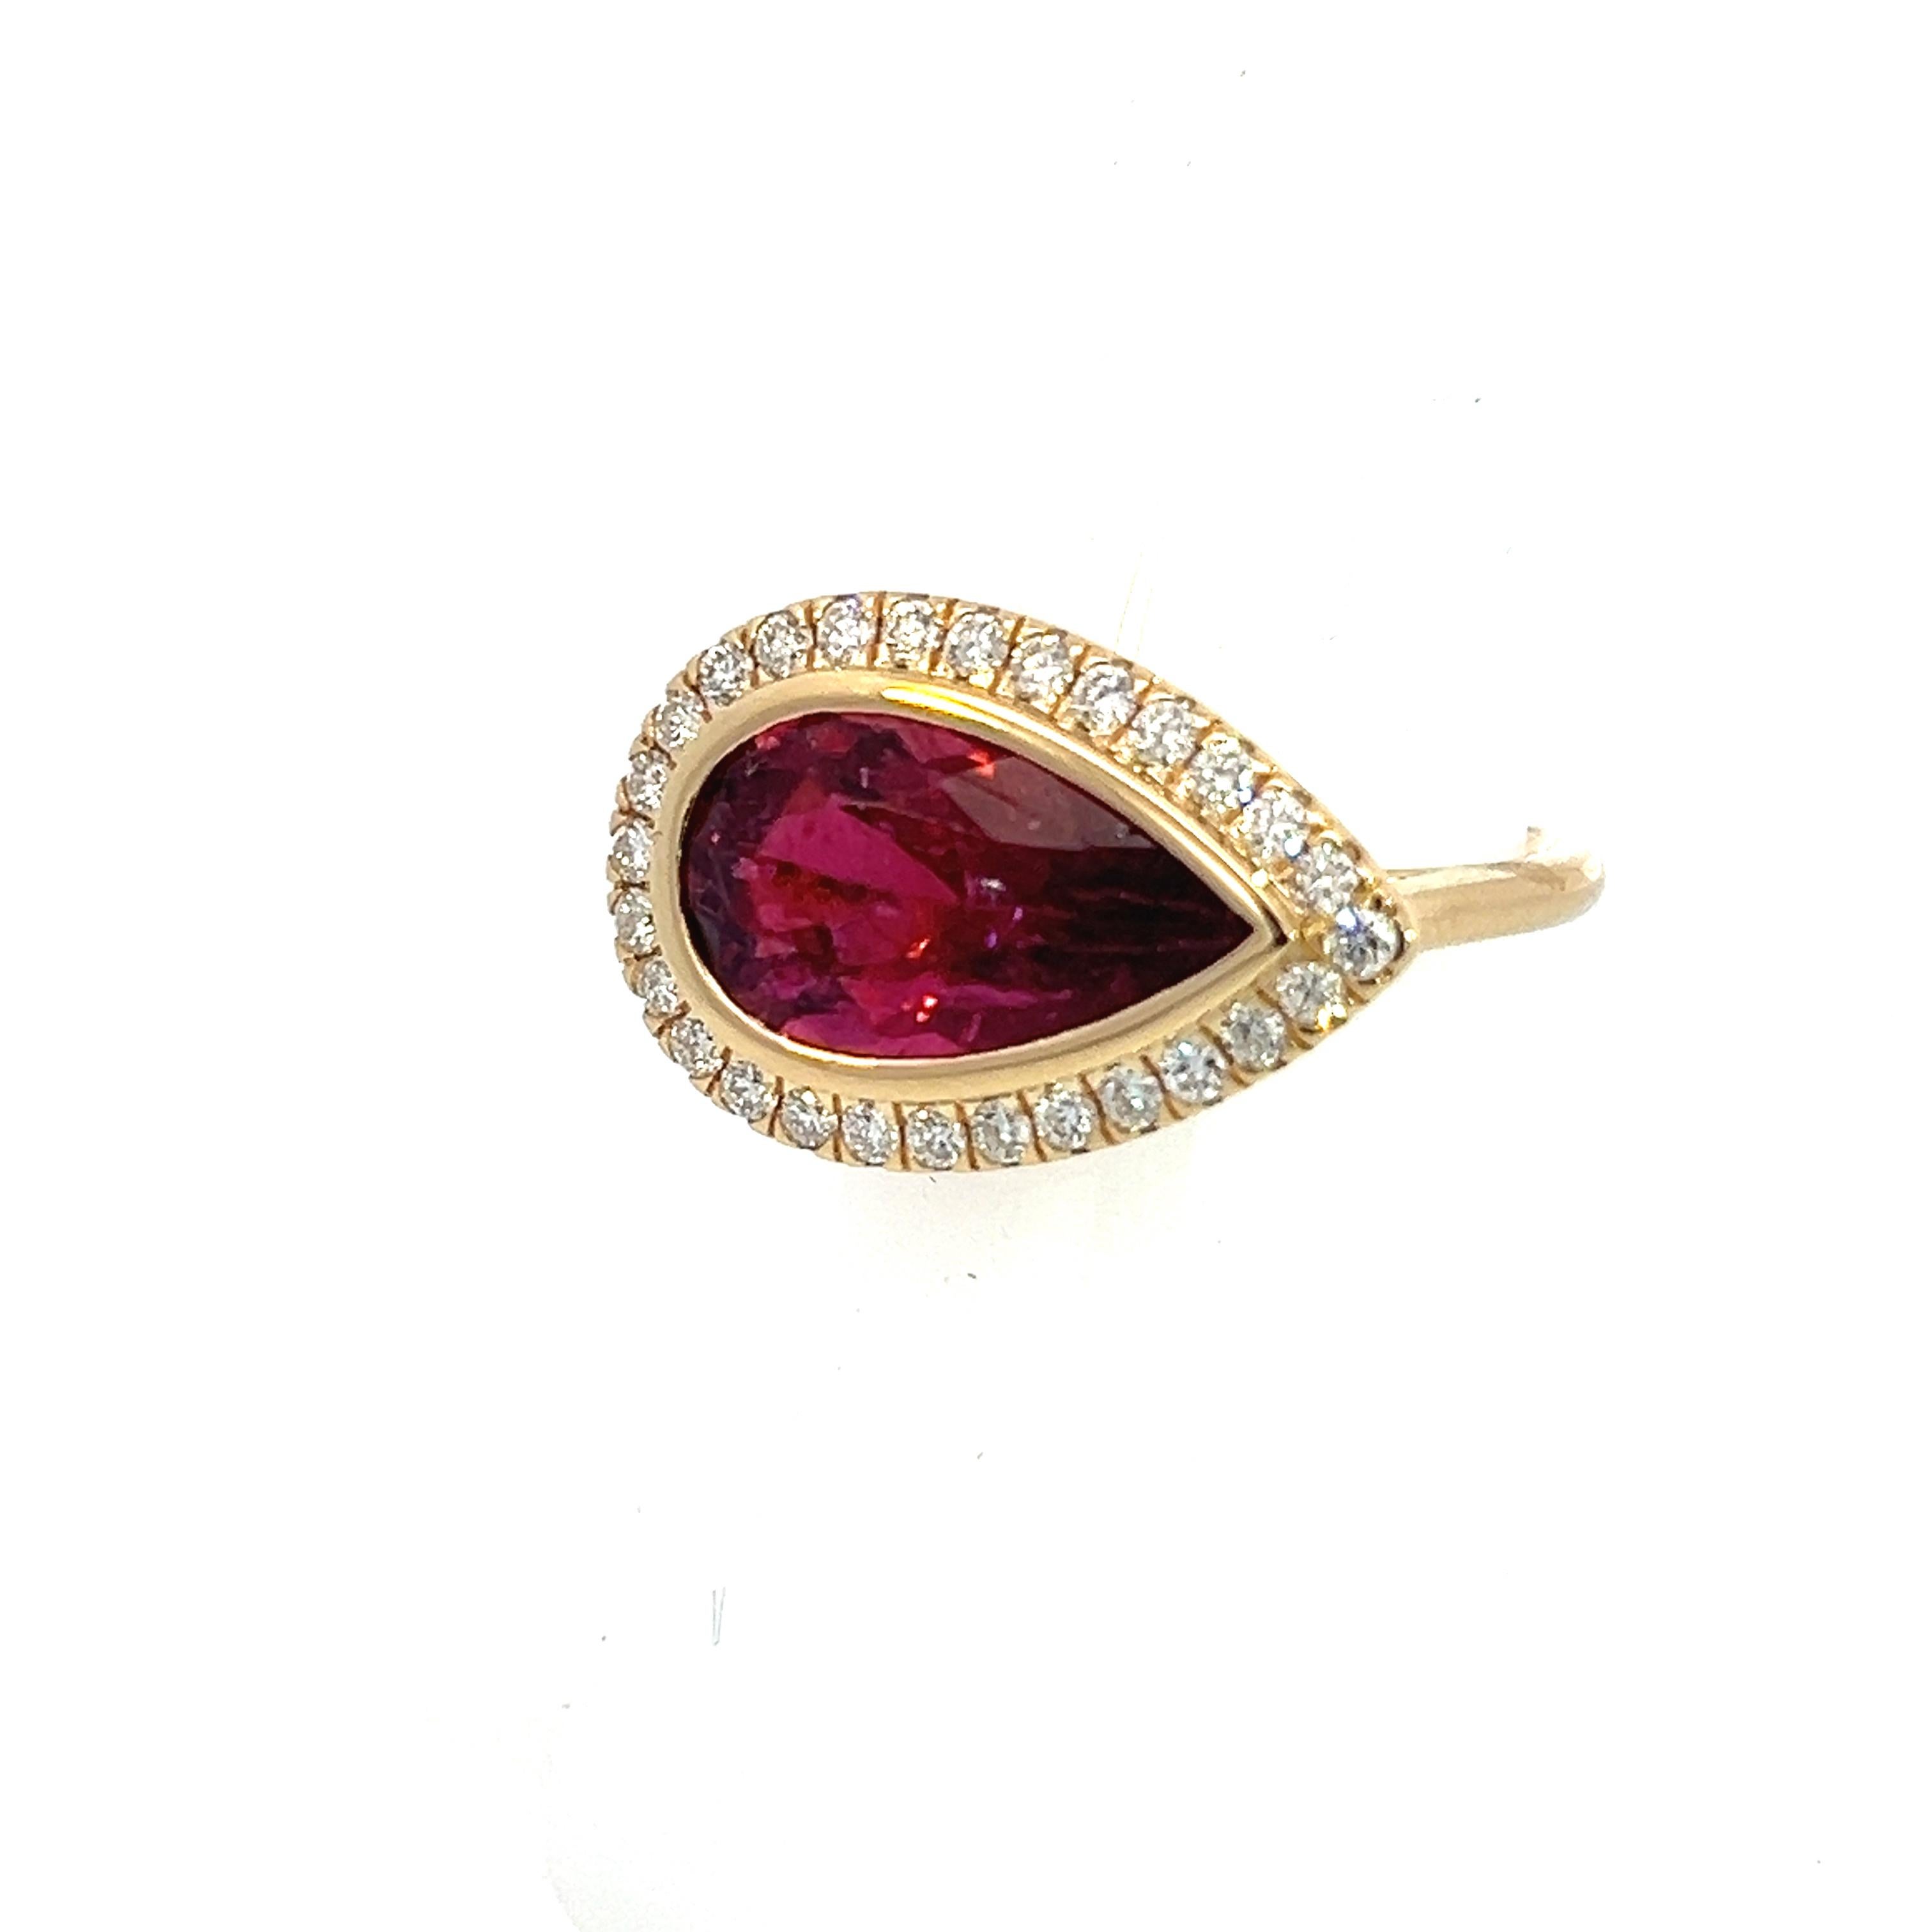 Women's Natural Rubellite Diamond Ring 6.5 14k Y Gold 4.68 TCW Certified For Sale